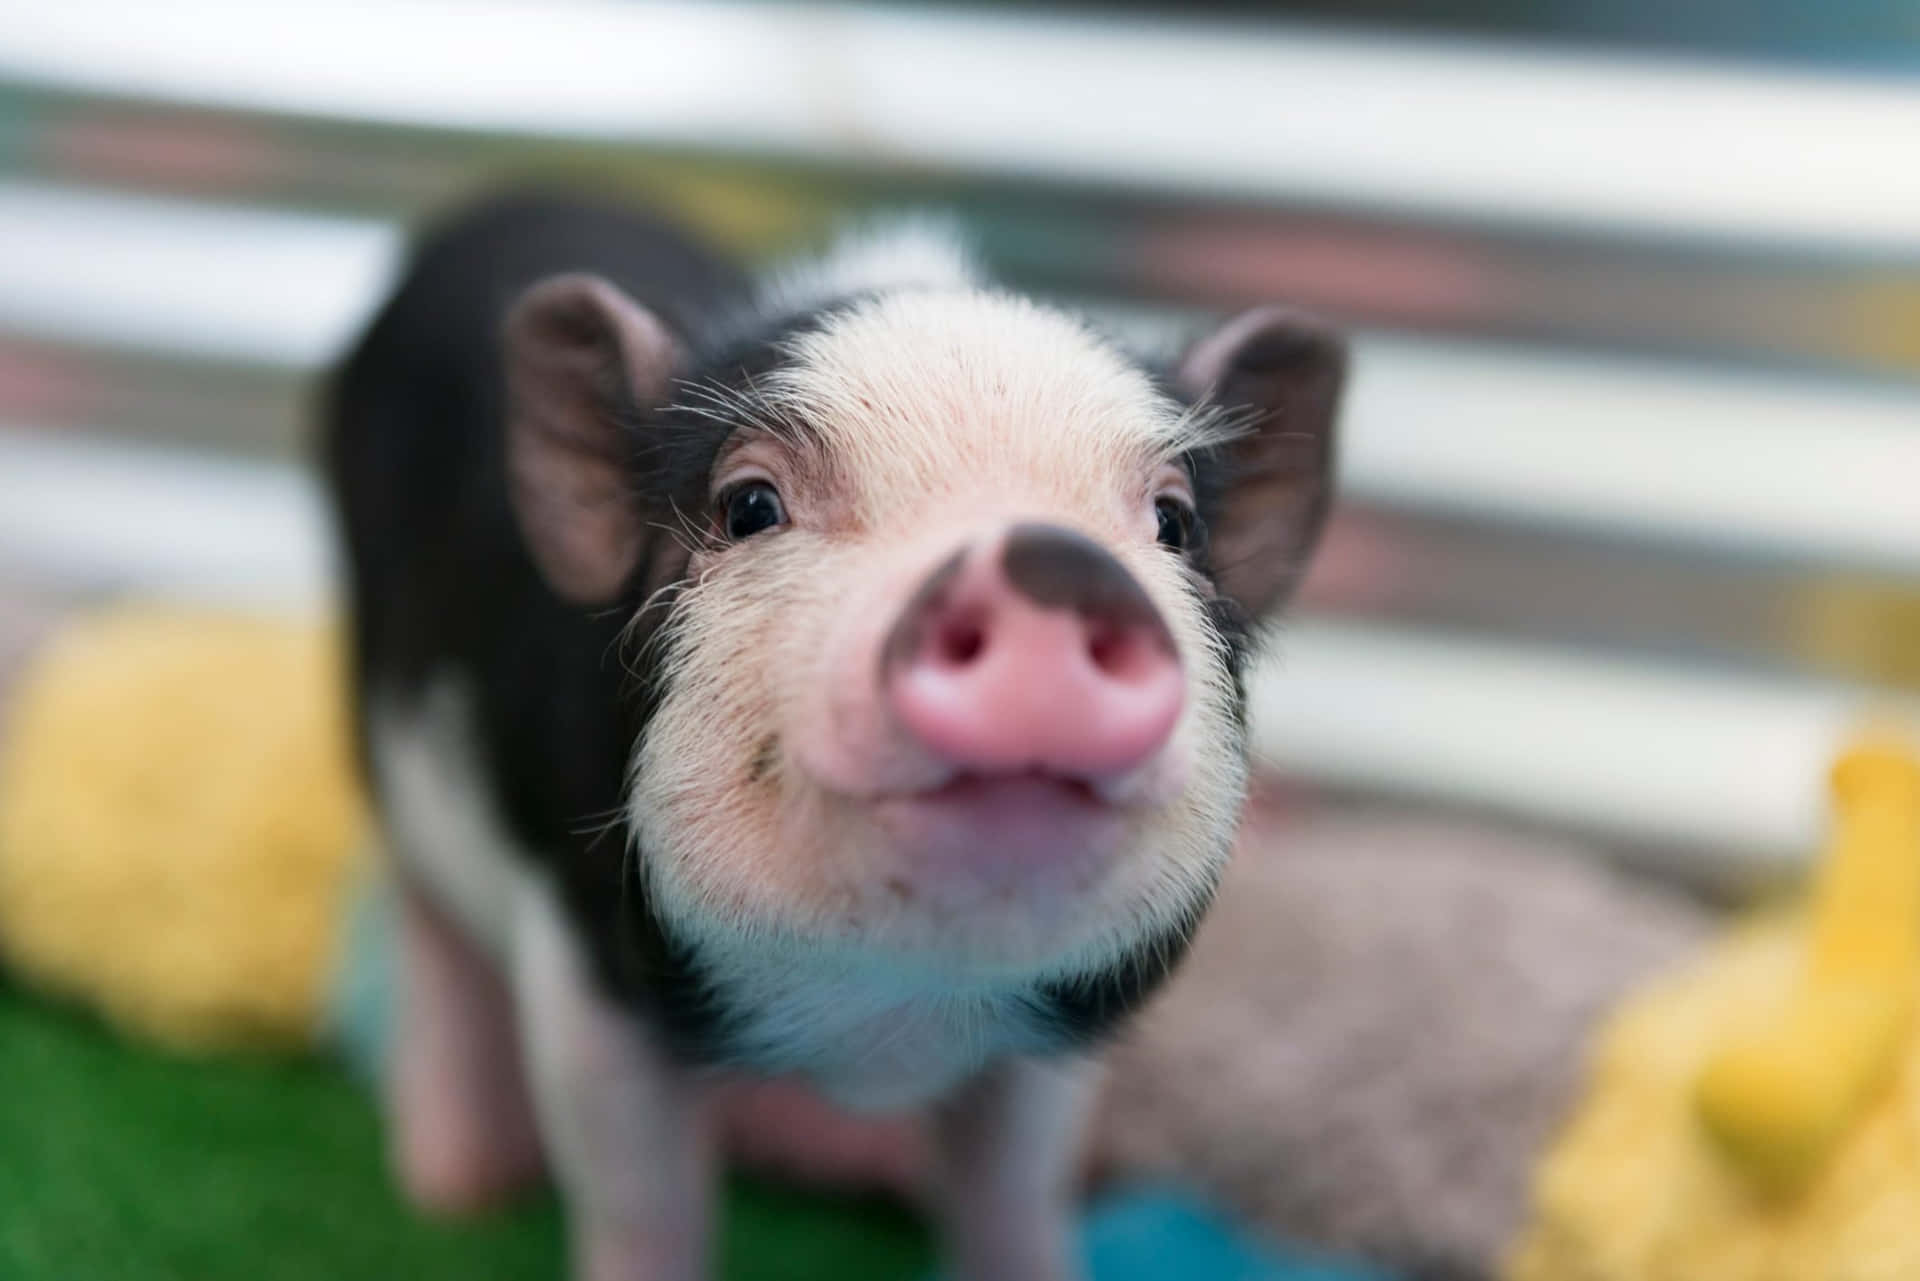 Cute Pigs Adorable Smile Picture